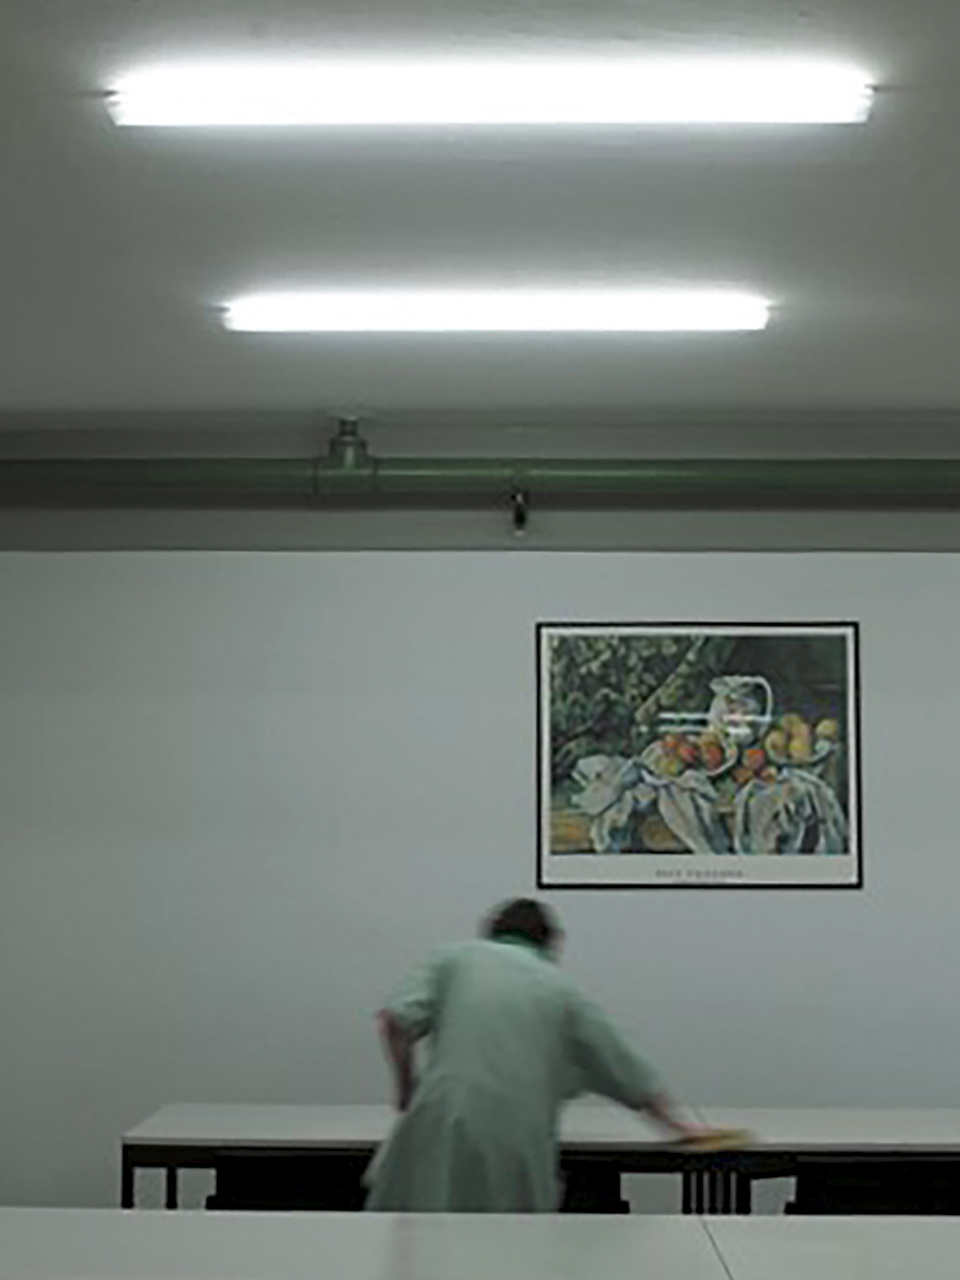 Figure 1: Example lighting installation with poor glare control